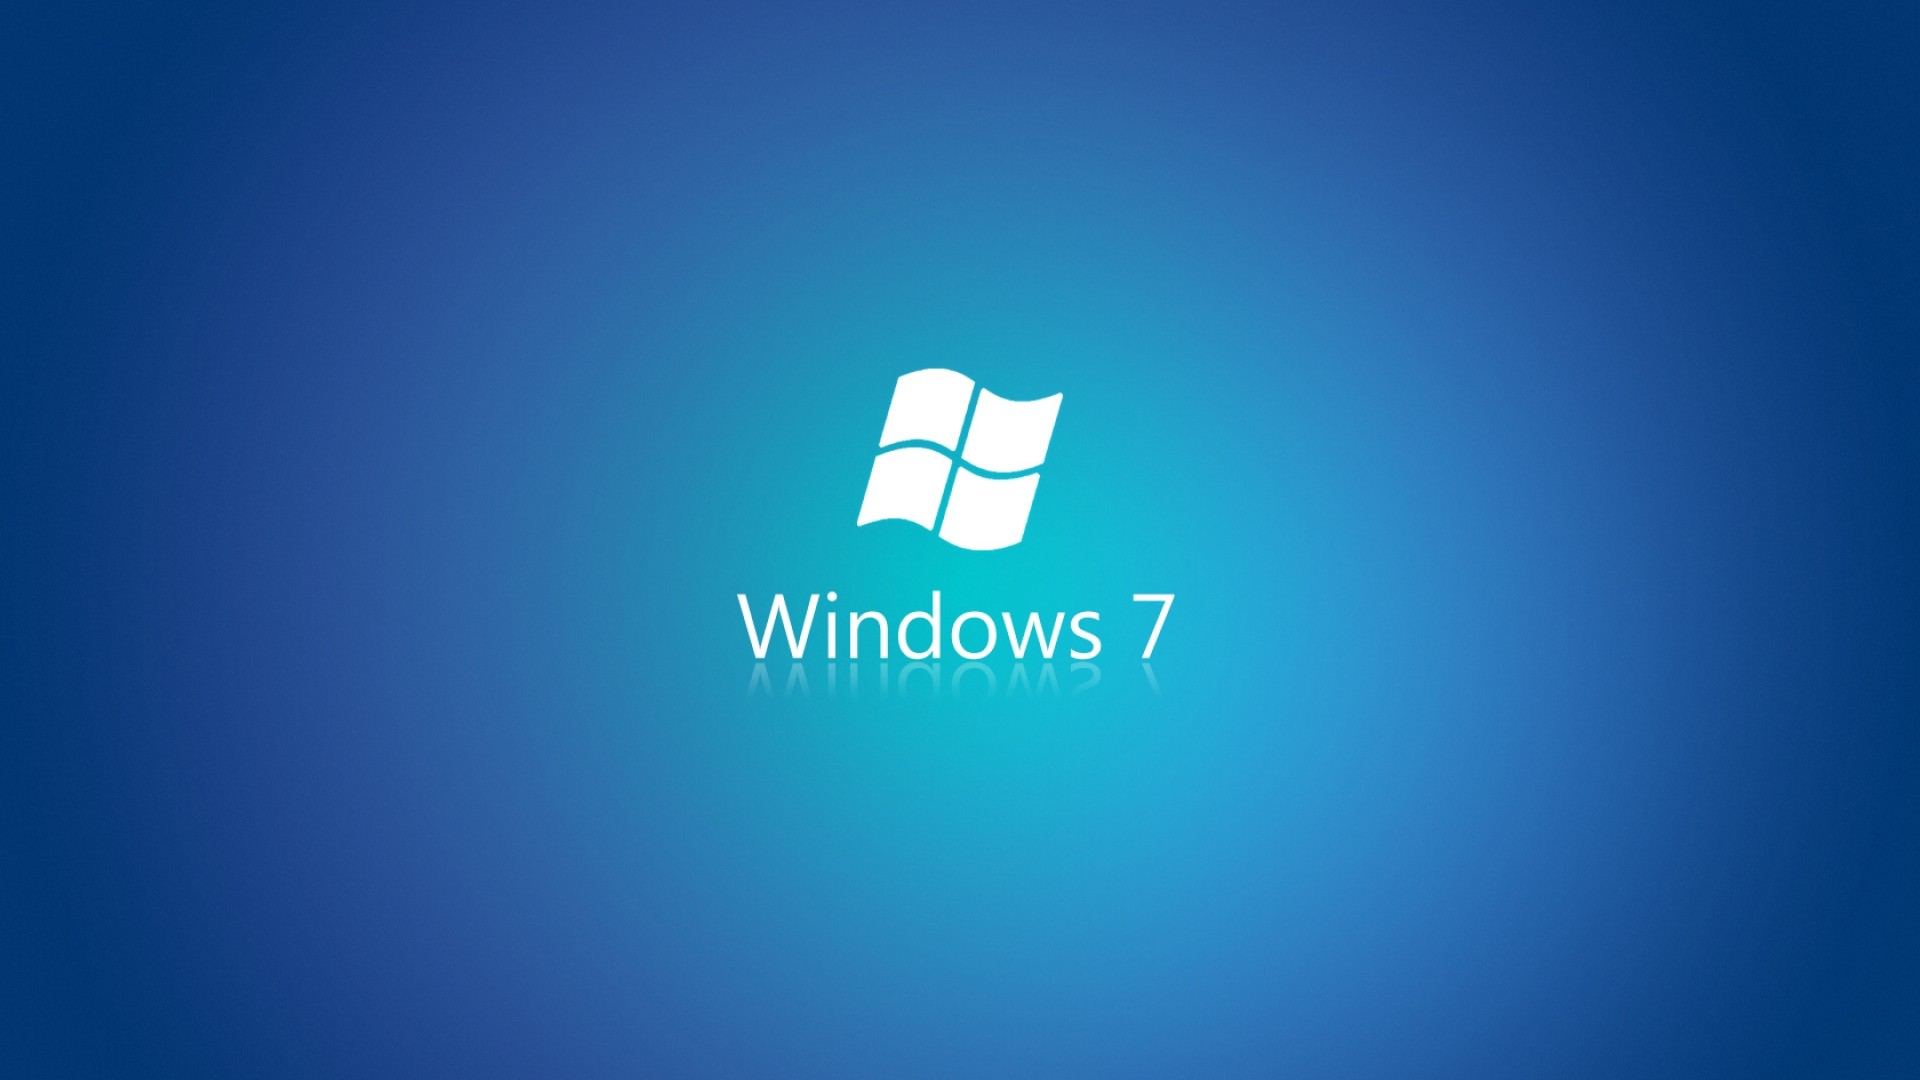 1920x1080 Window 7 Wallpapers High Resolution with High Definition Wallpaper   px 844.15 KB Logo 3d View